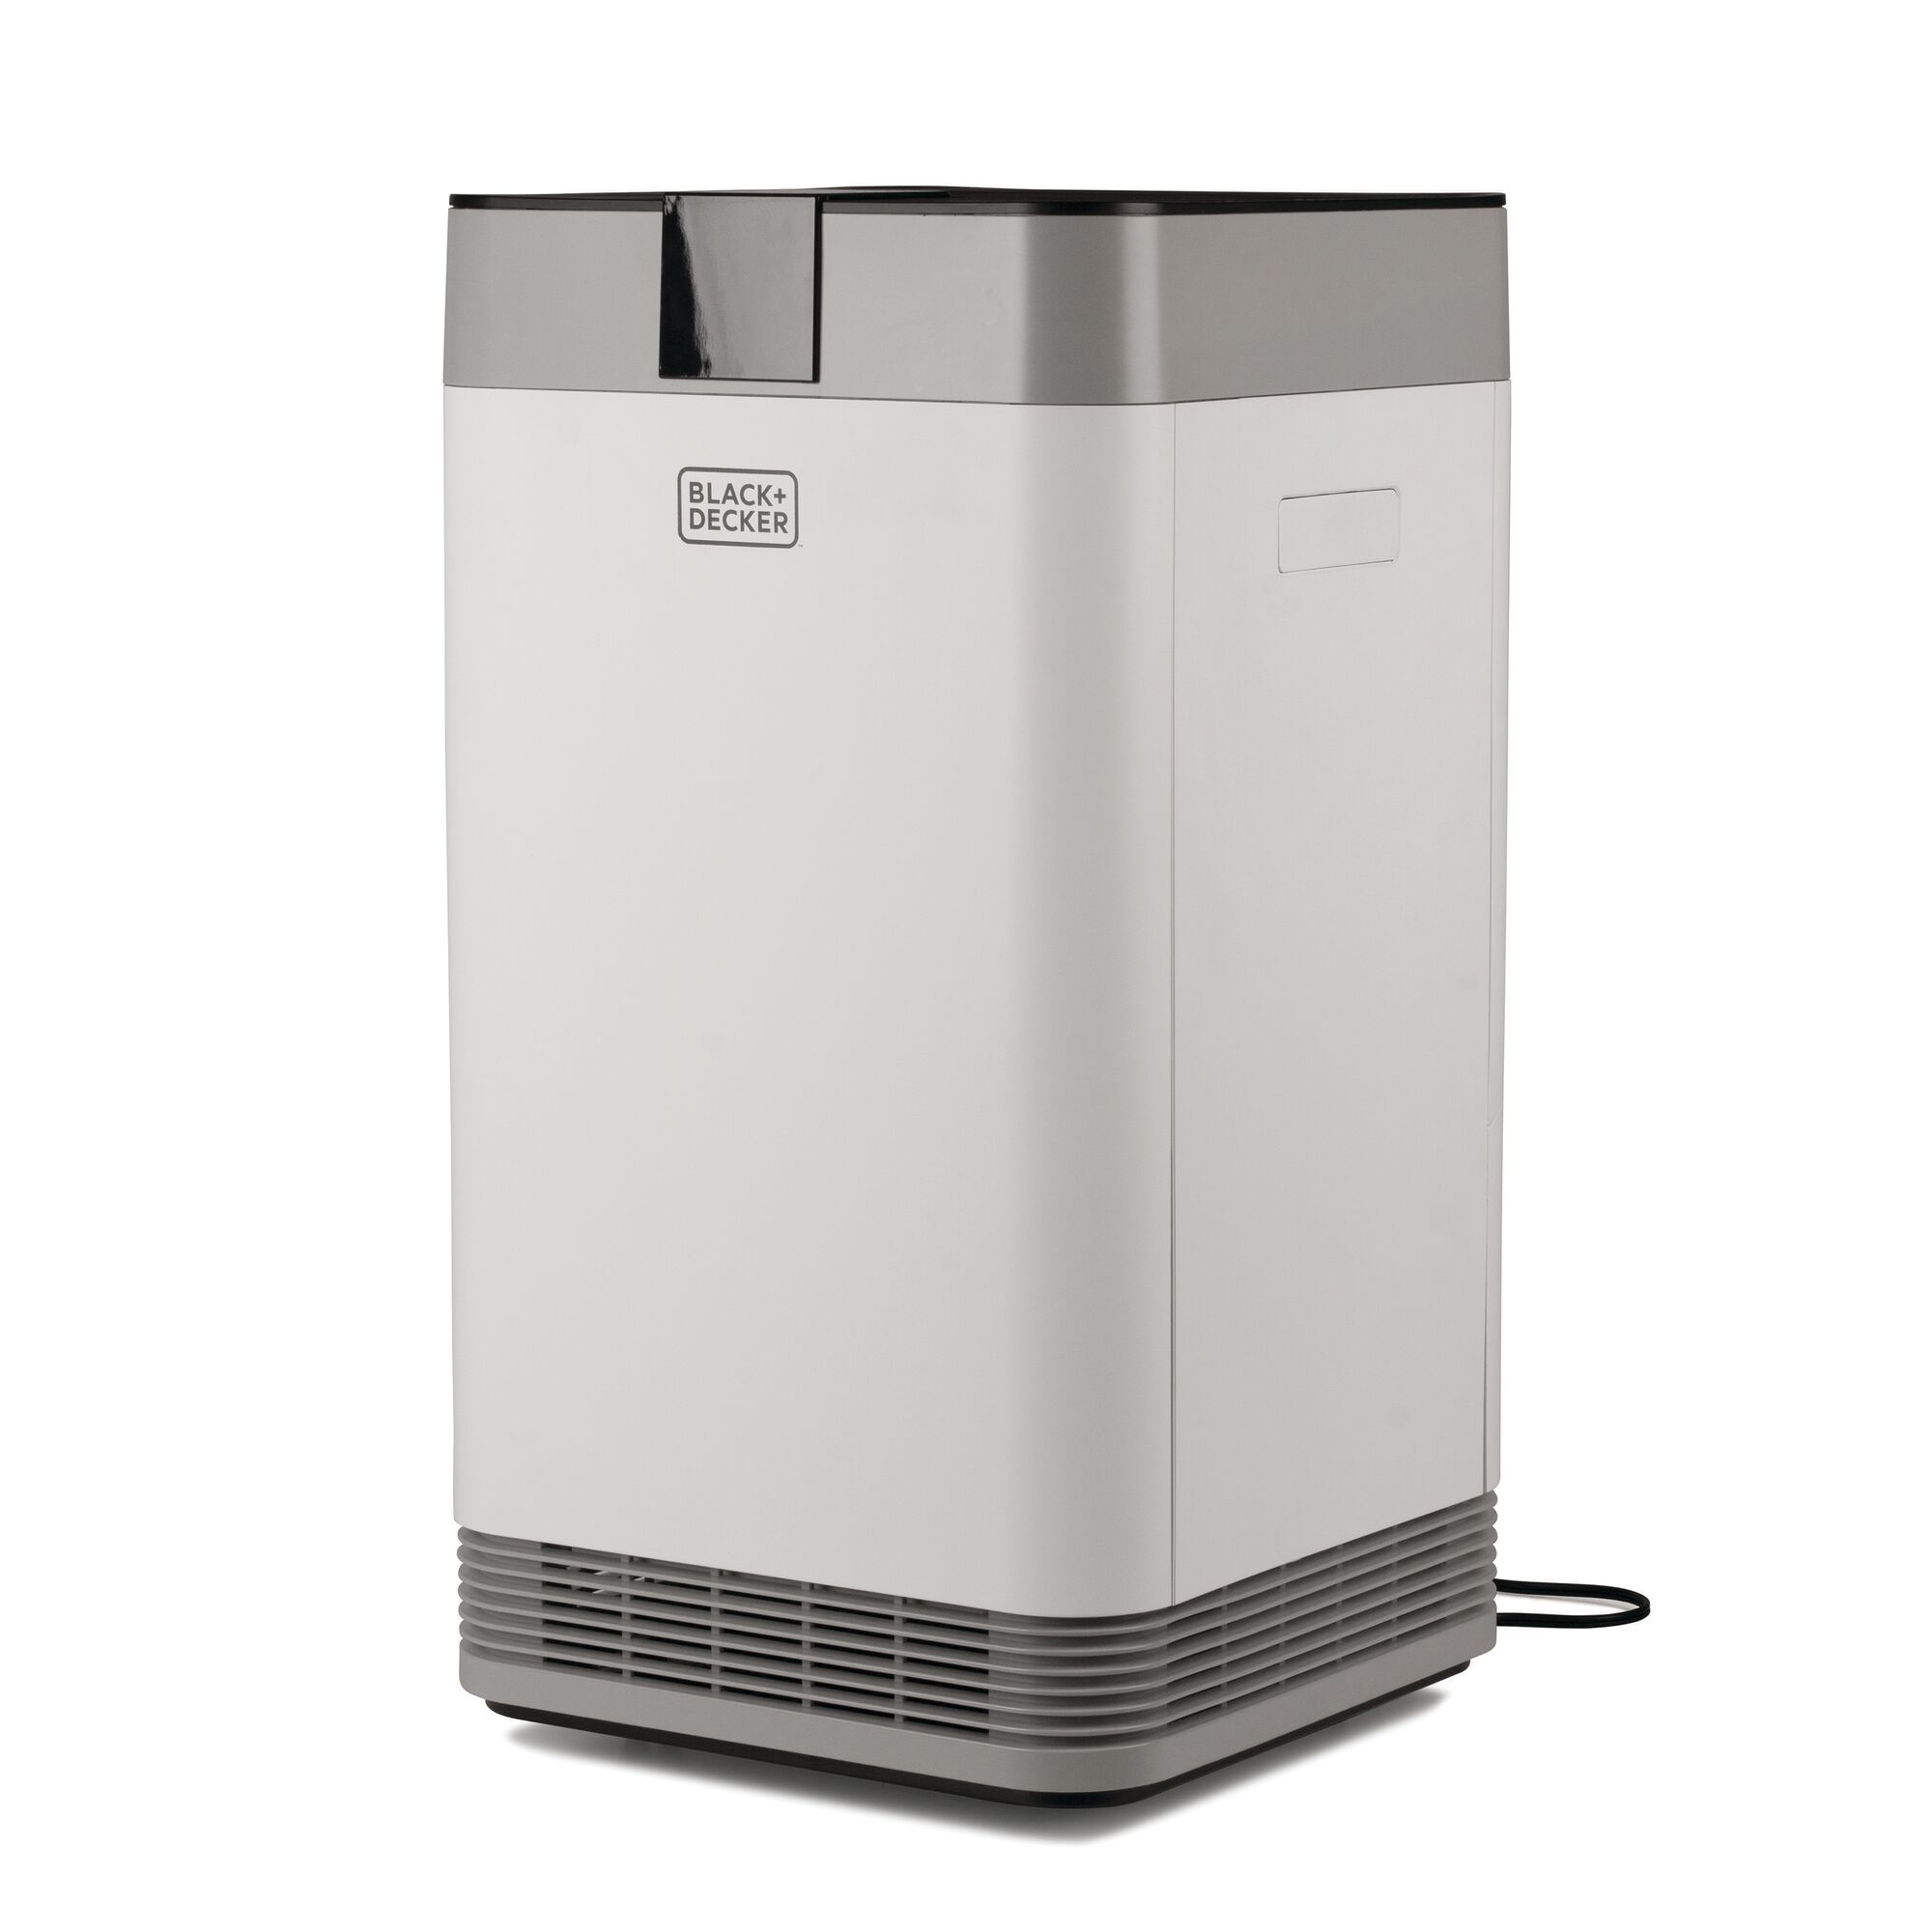 Profile image of the BLACK+DECKER electrostatic air purifier